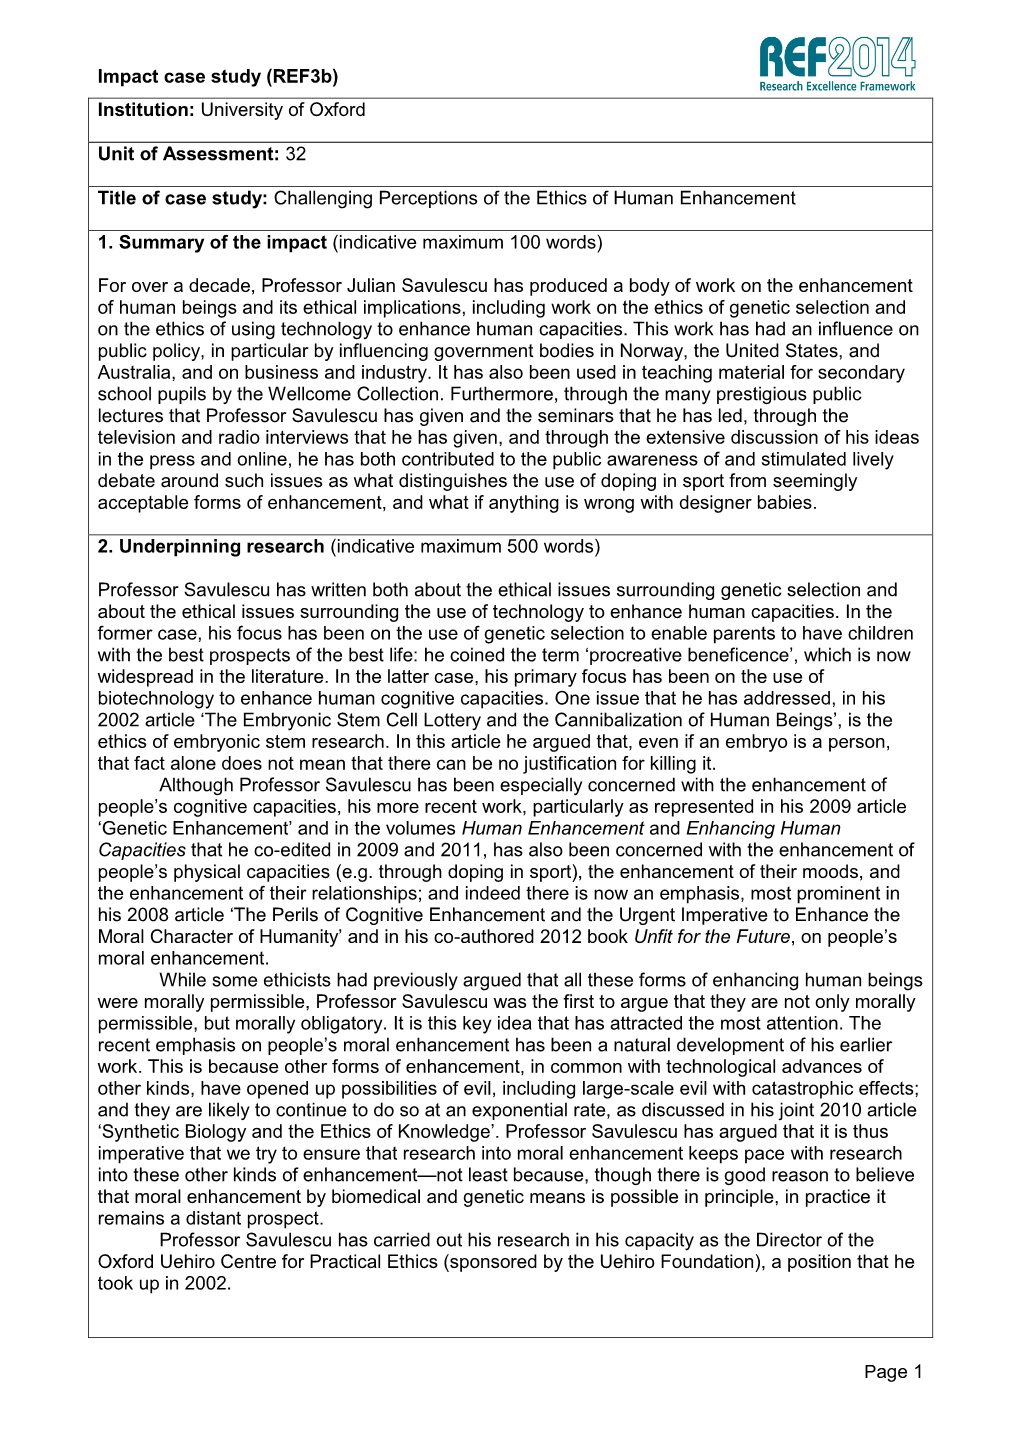 Impact Case Study (Ref3b) Page 1 Institution: University of Oxford Unit of Assessment